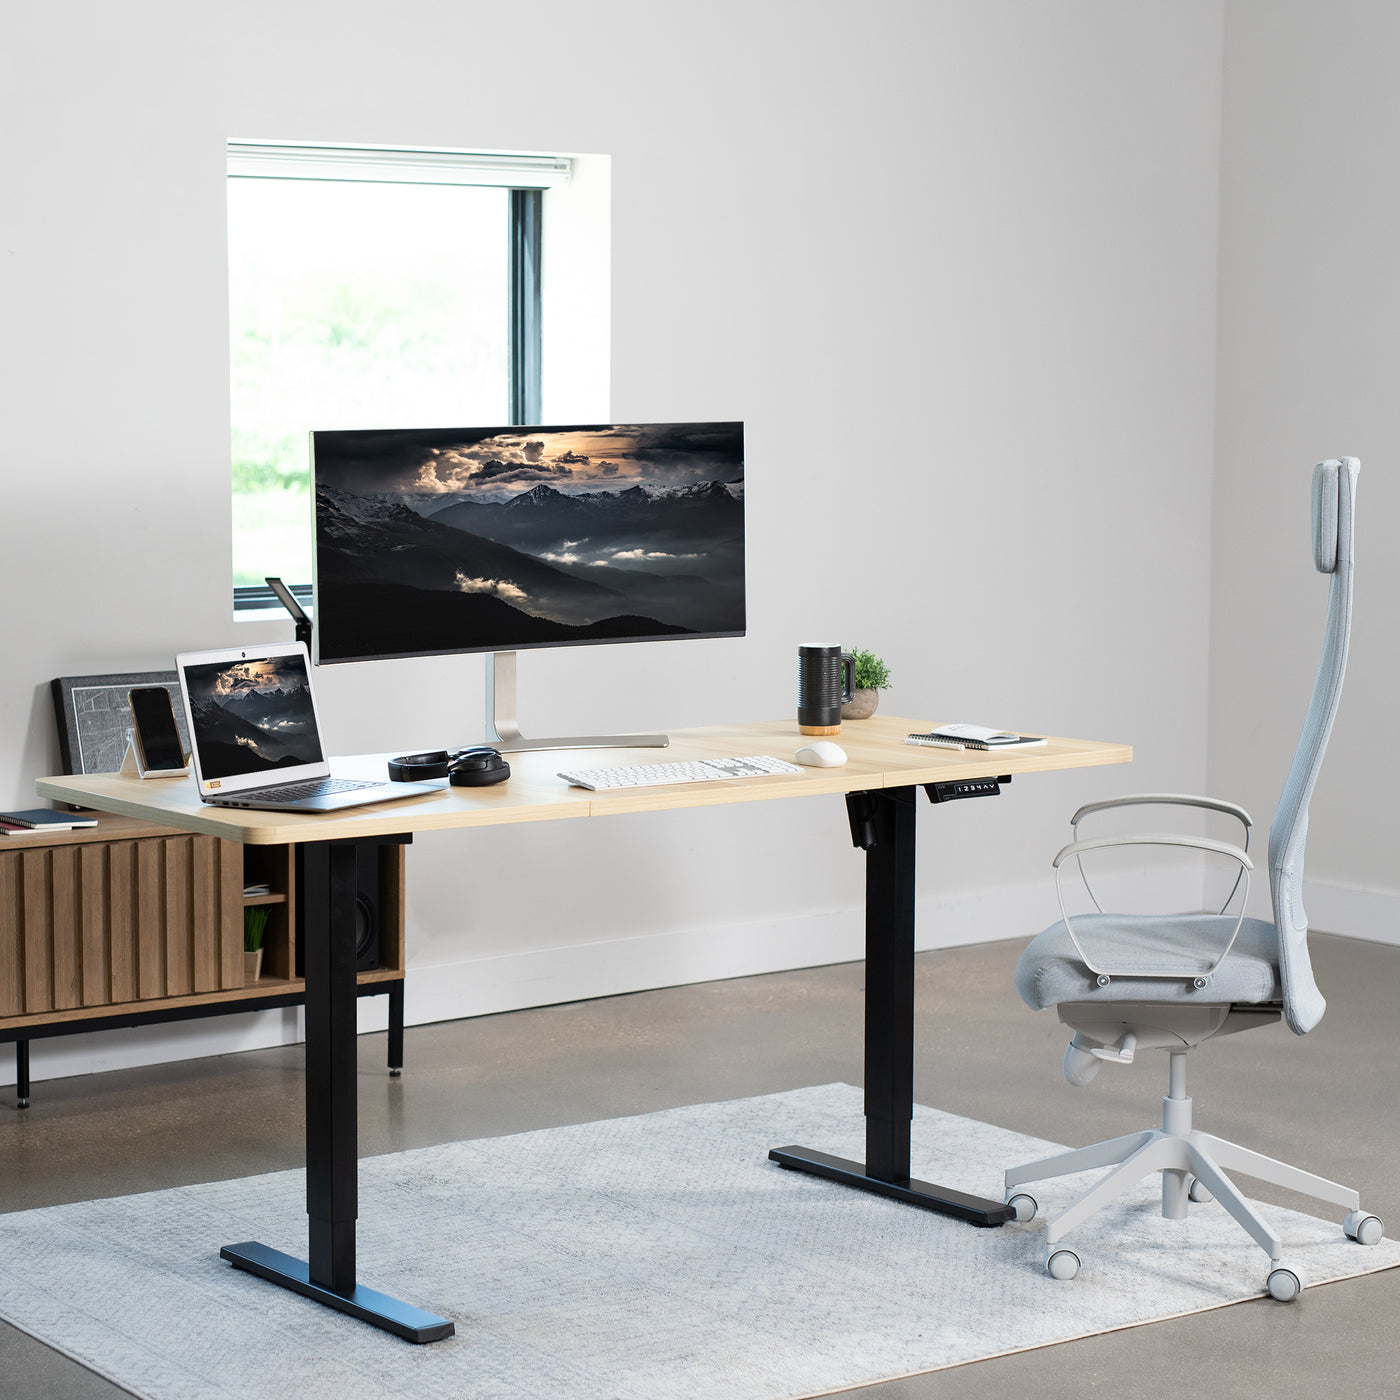 Sturdy ergonomic sit or stand desk frame for active workstation with telescoping legs.